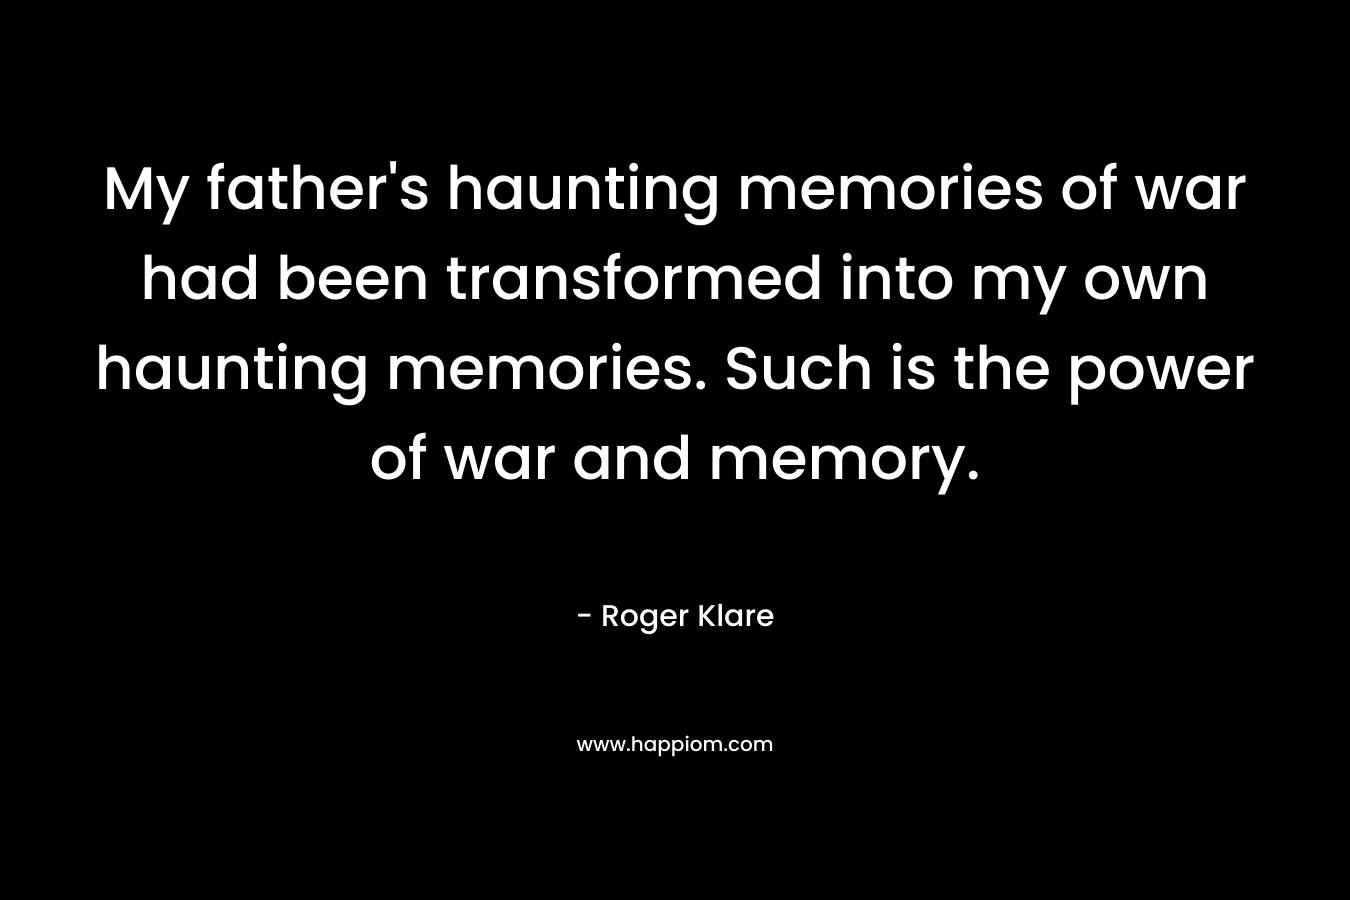 My father's haunting memories of war had been transformed into my own haunting memories. Such is the power of war and memory.